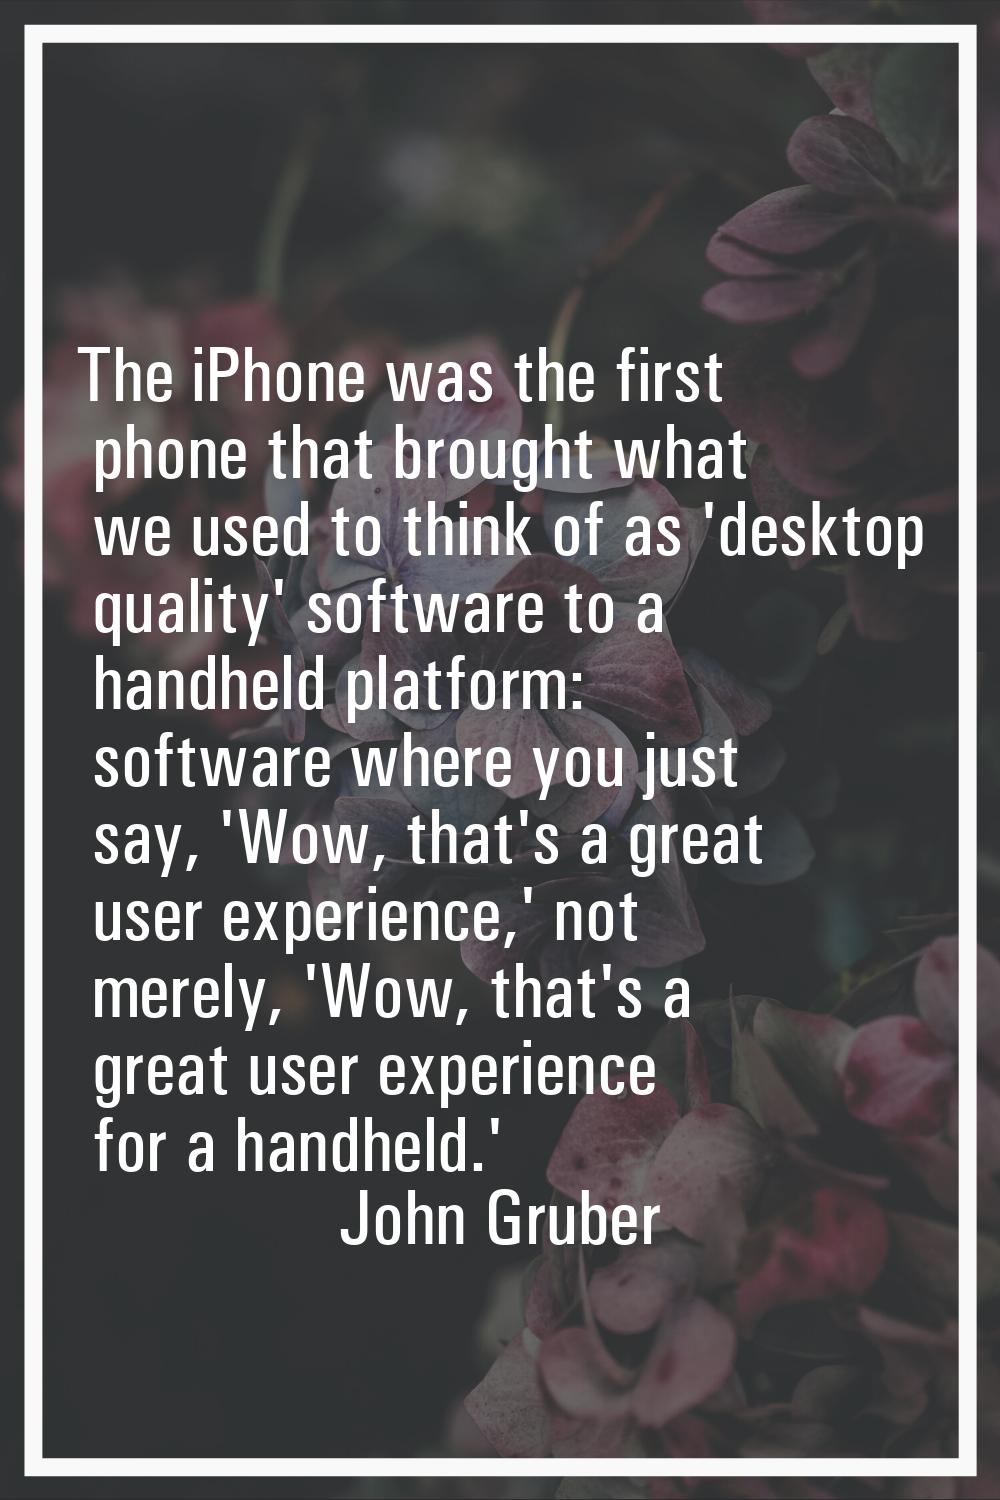 The iPhone was the first phone that brought what we used to think of as 'desktop quality' software 